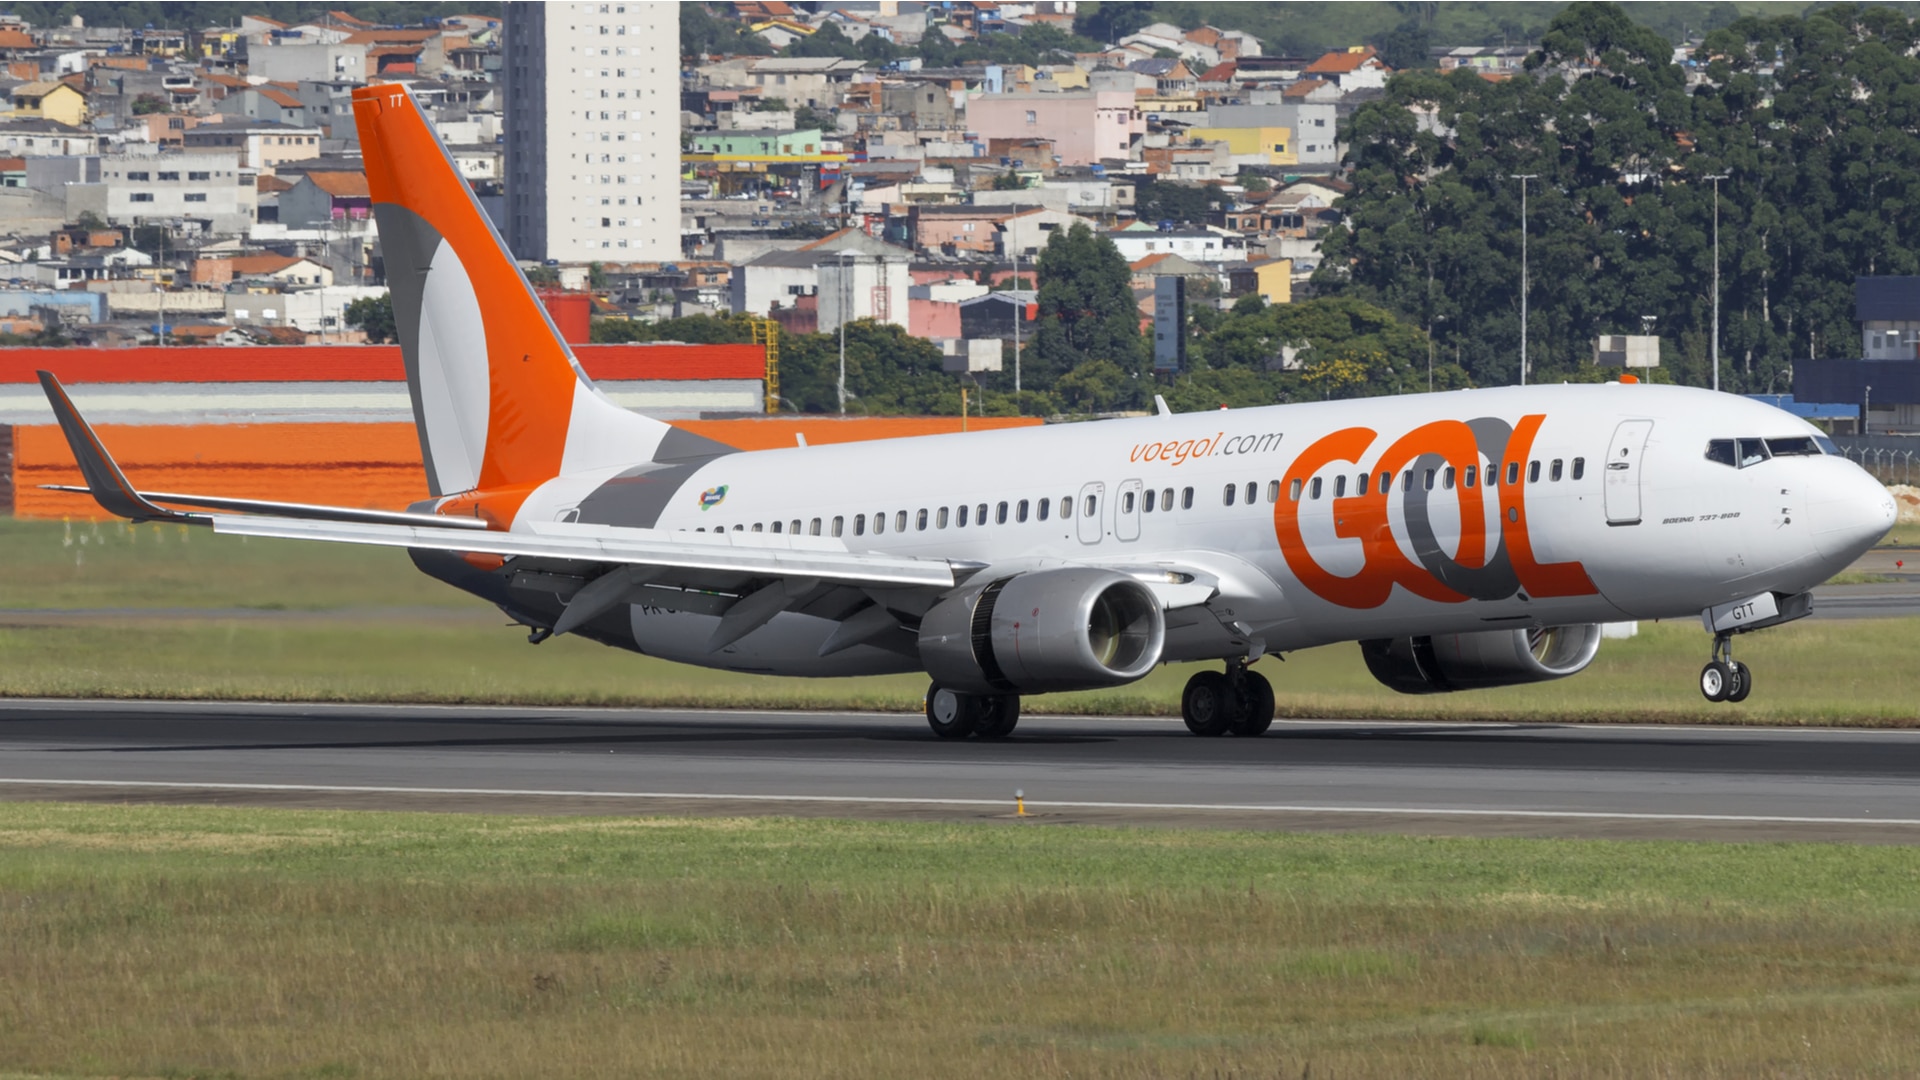 GOL launches free stop-over service in São Paulo